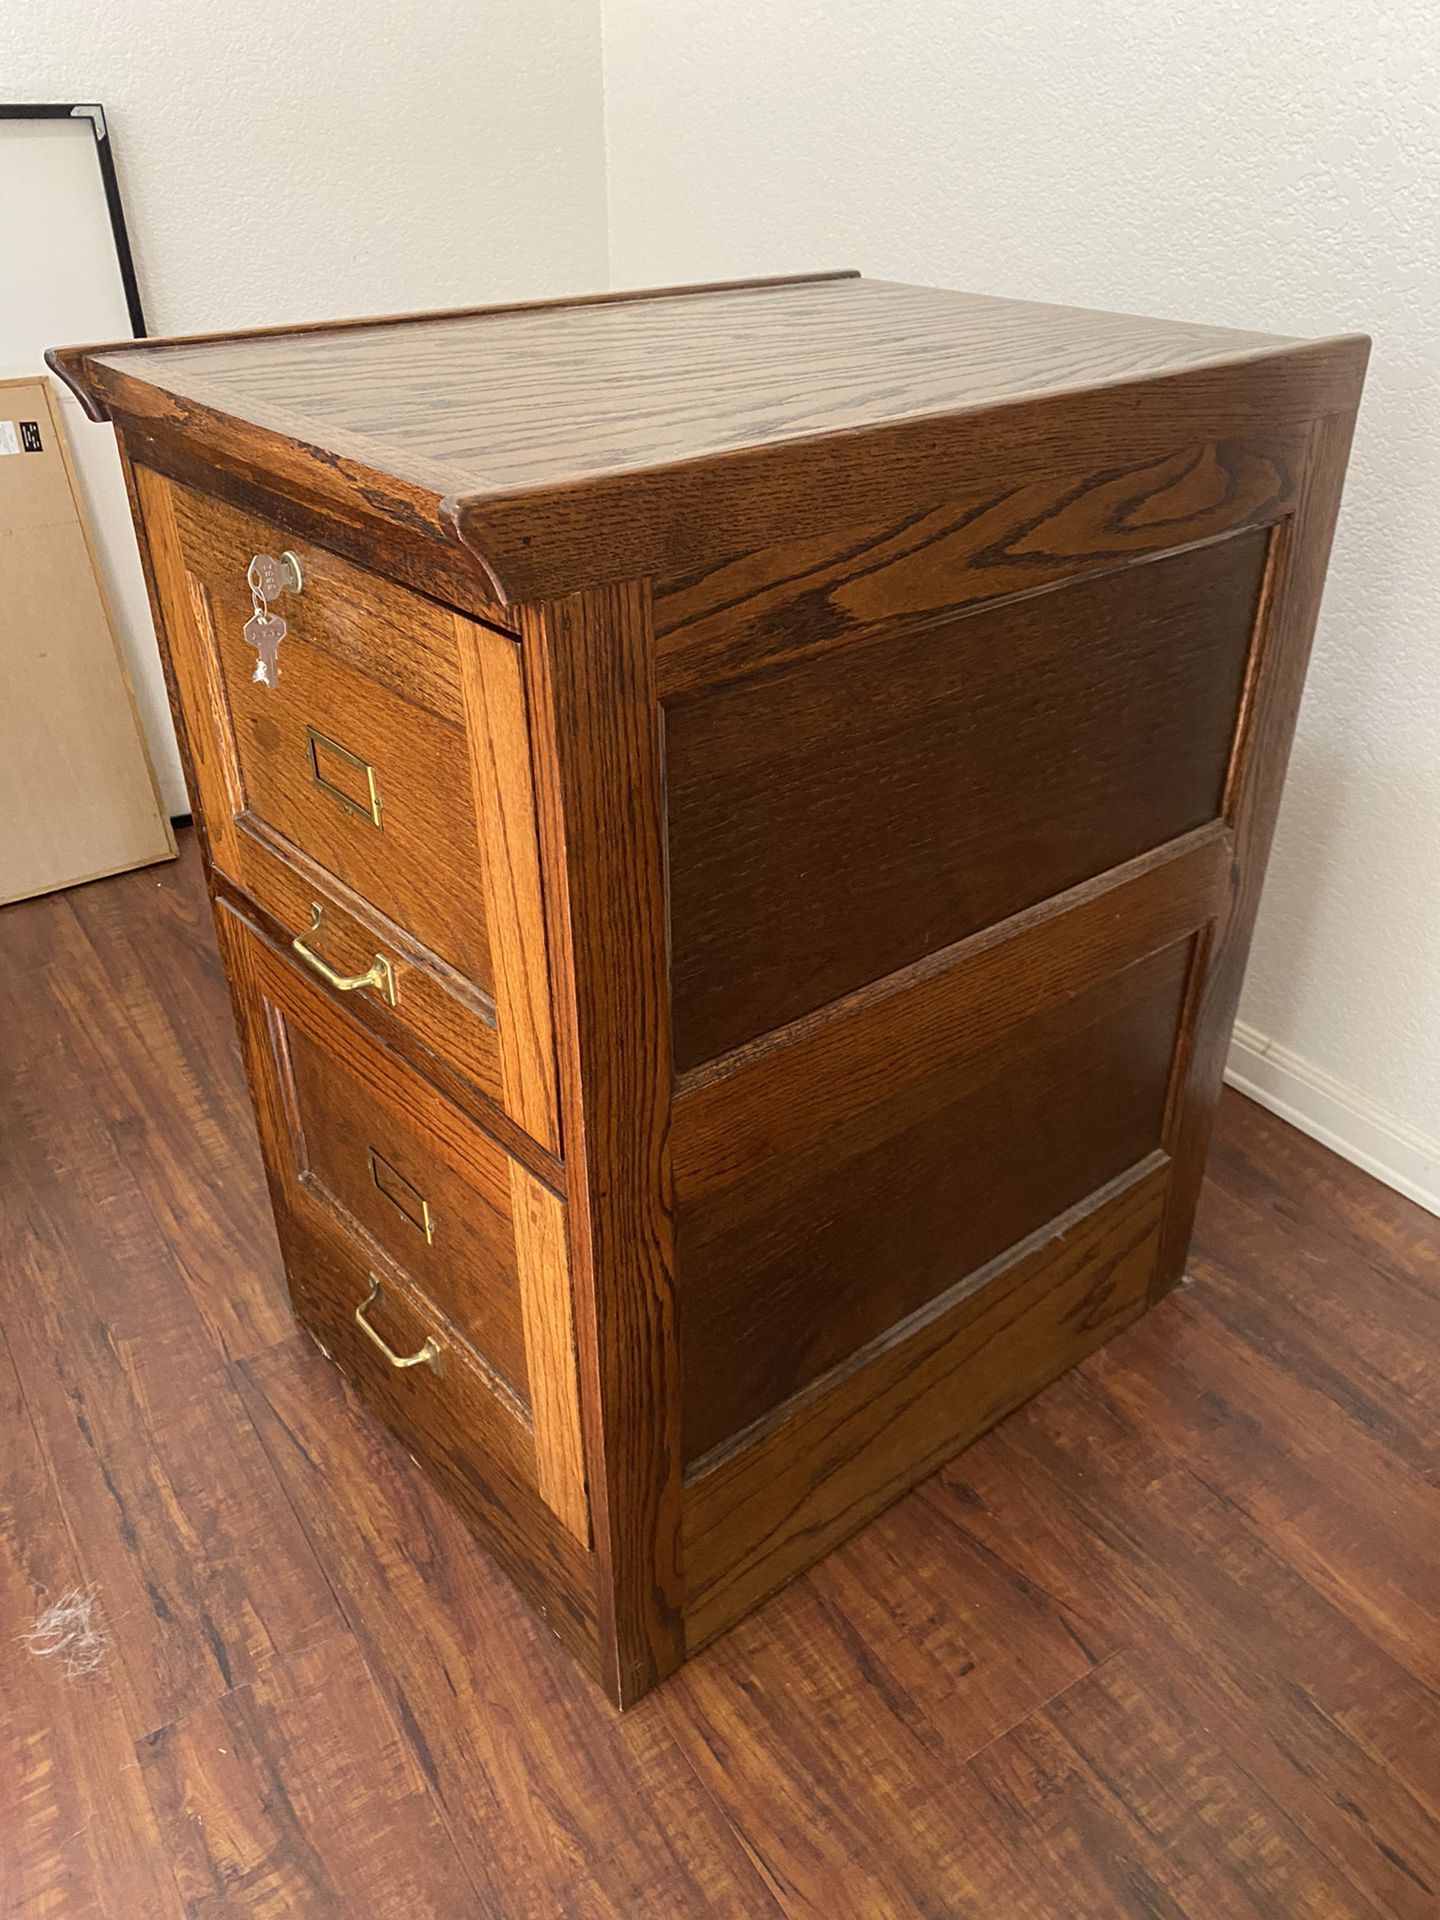 Antique Filing Cabinet Like-New Condition